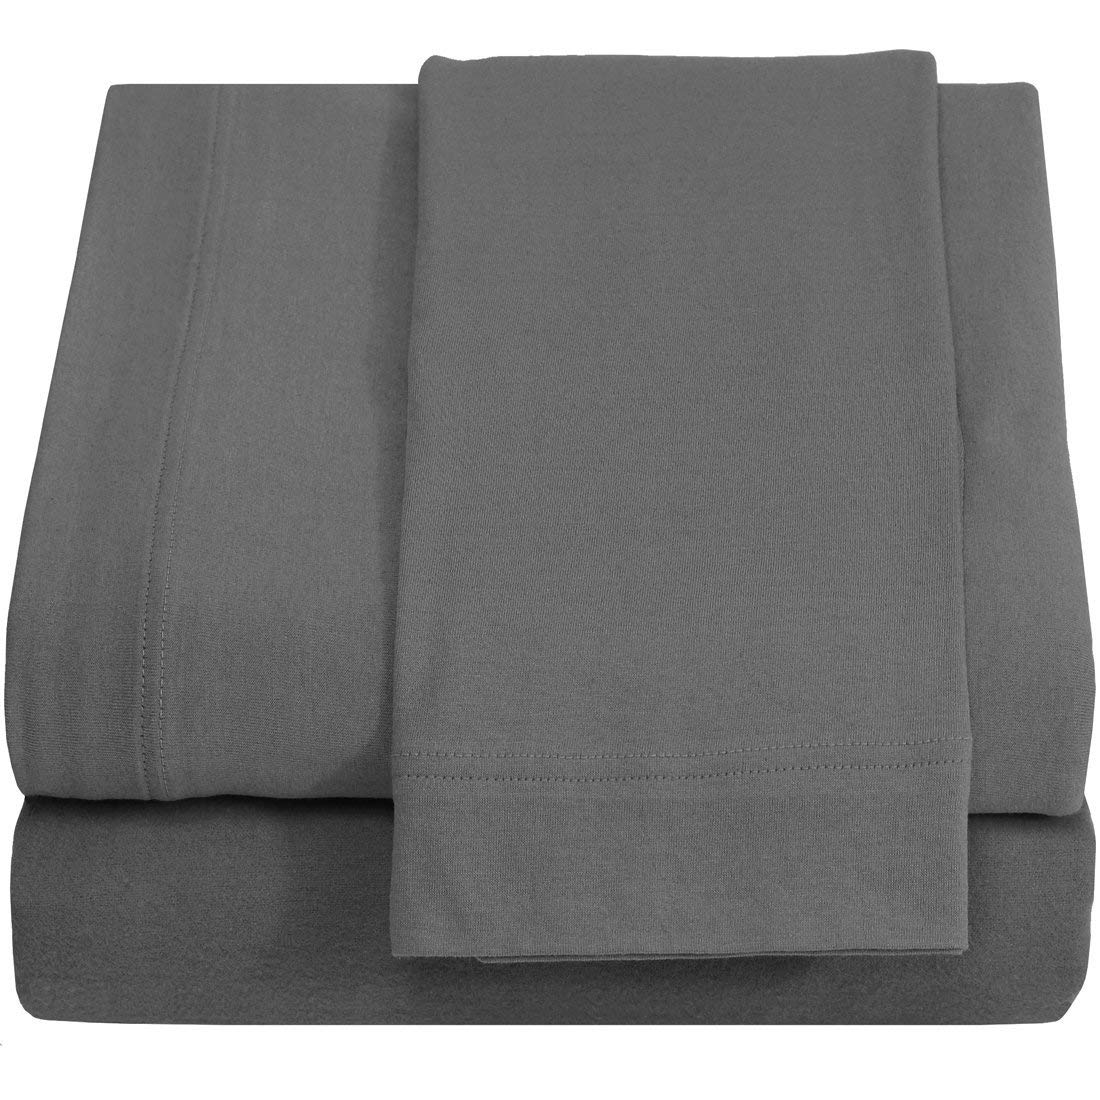 Book Cover Twin Extra Long 100% Cotton jersey Sheet Set - Soft and Comfy - By Crescent Bedding Grey Twin XL Twin XL Grey